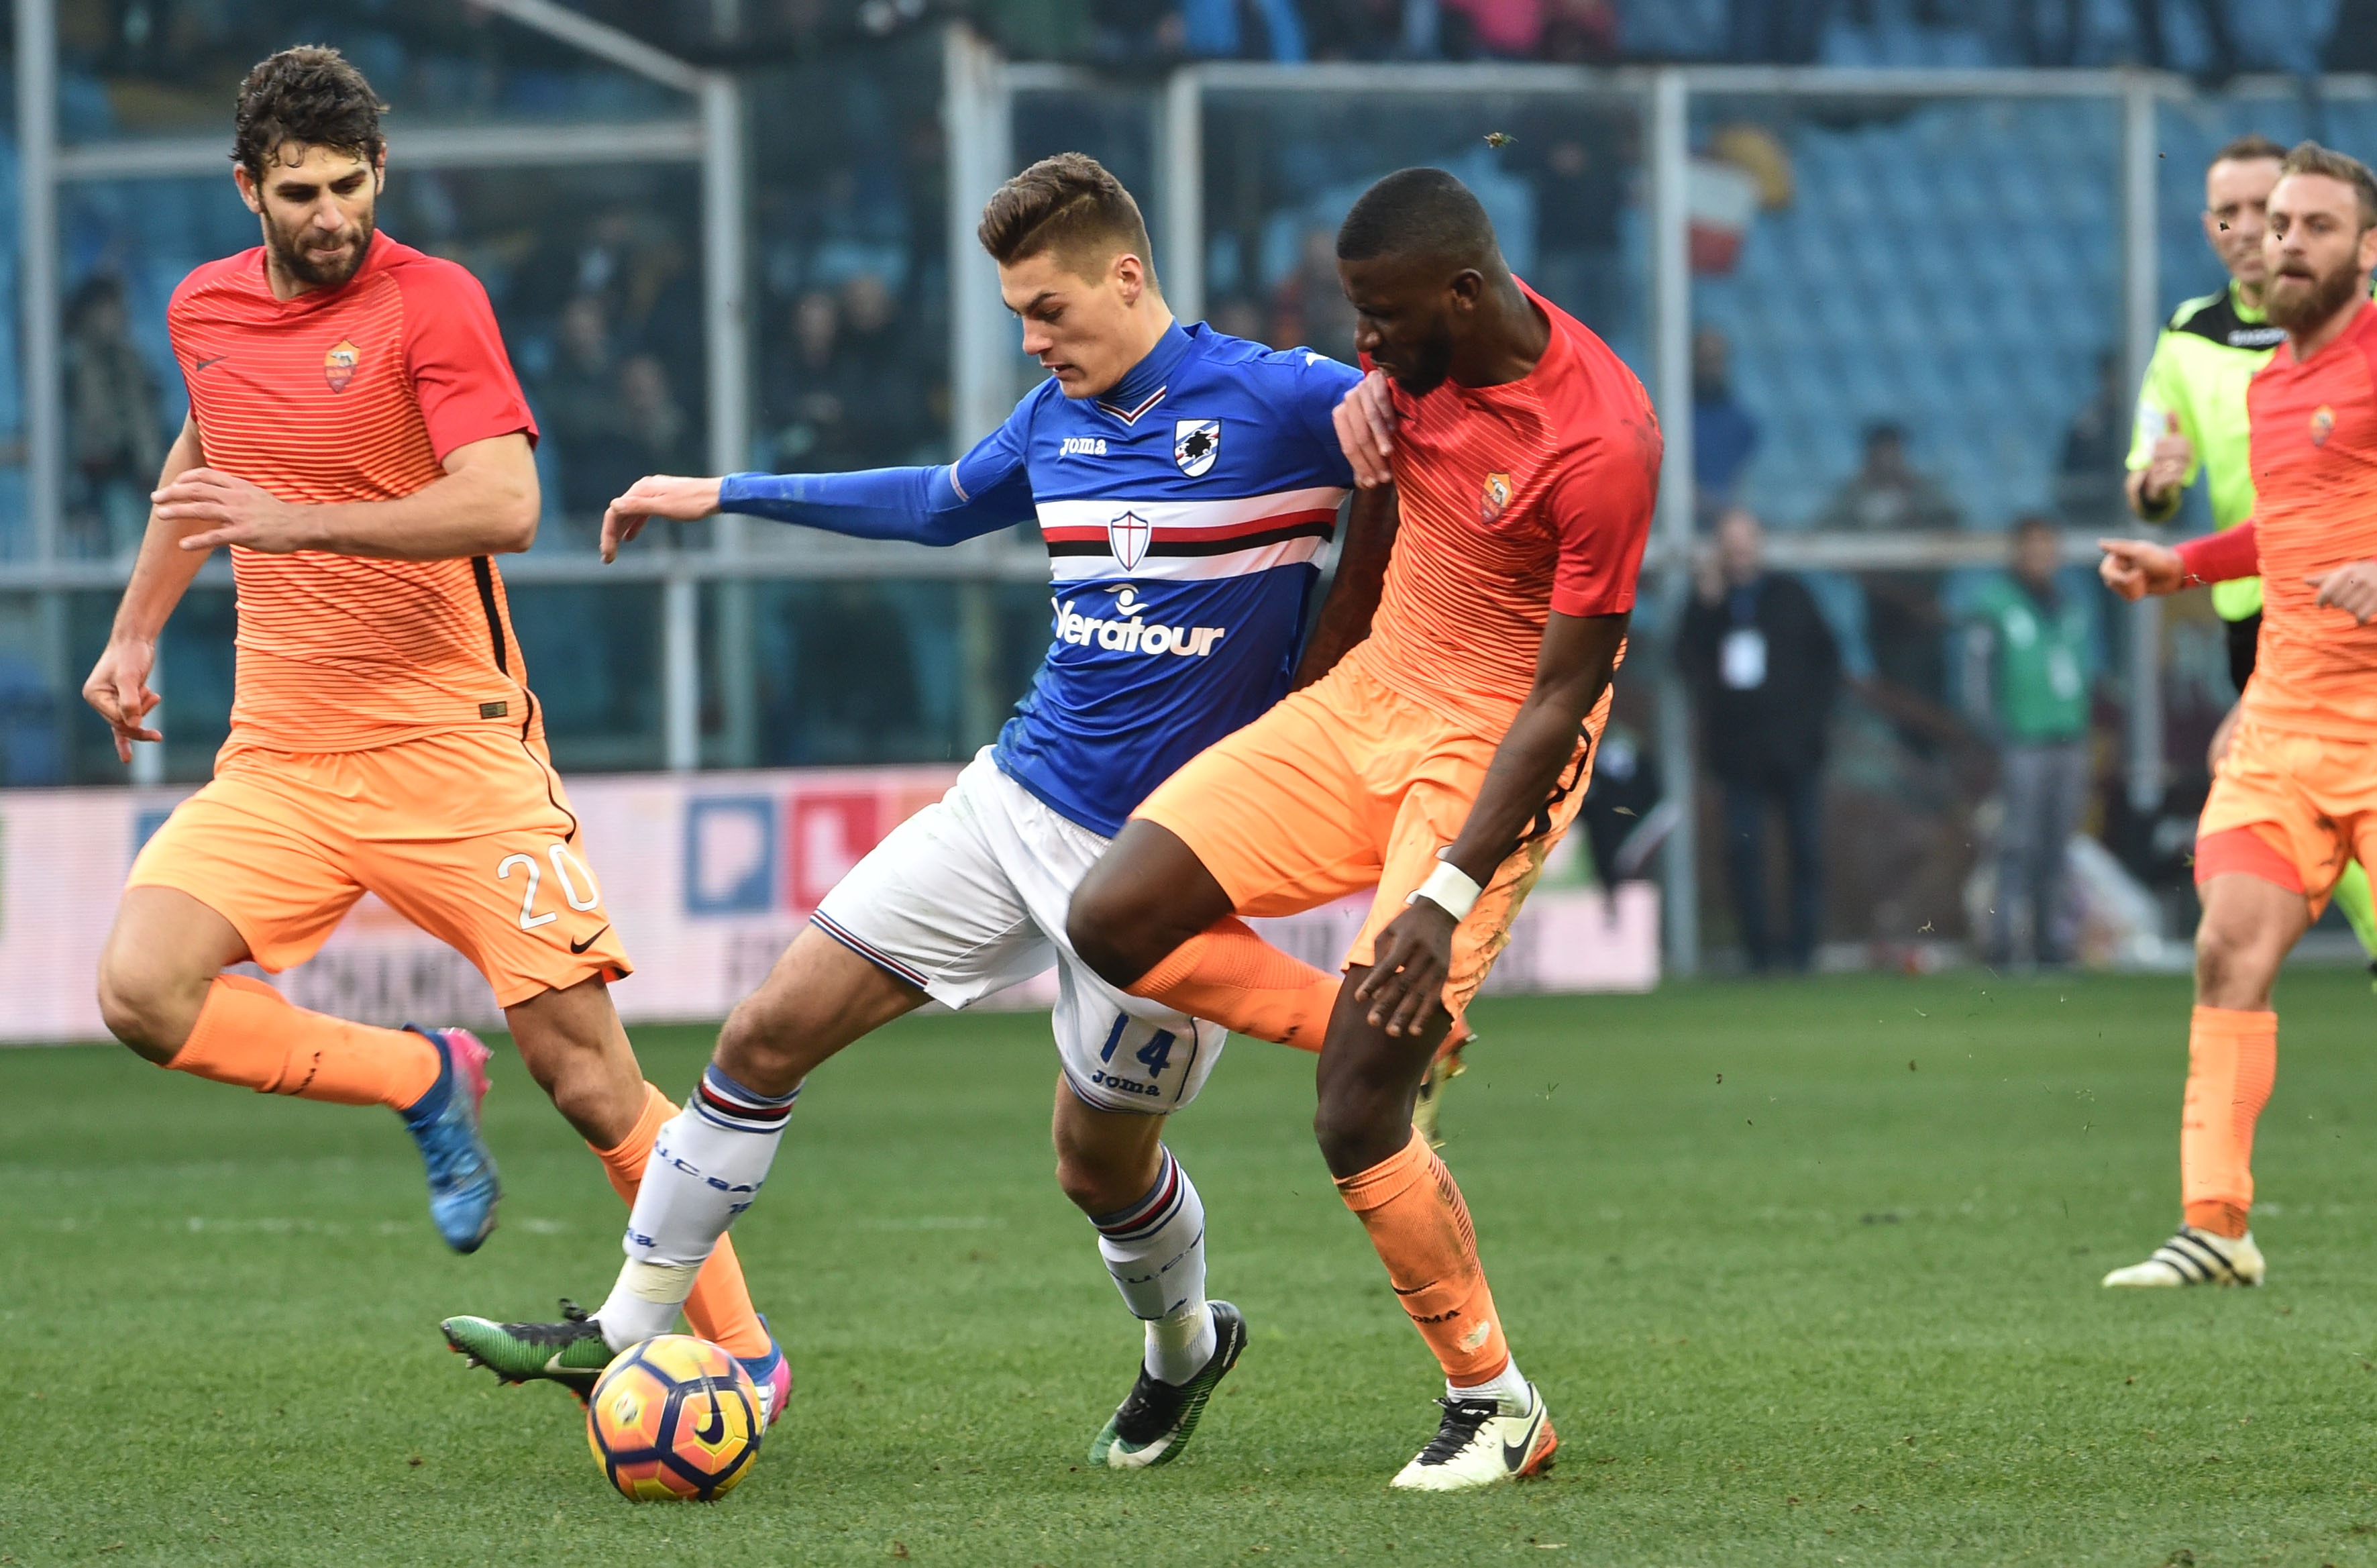 Marco Giampaolo: “Schick has been training as usual – offers are affecting the club”